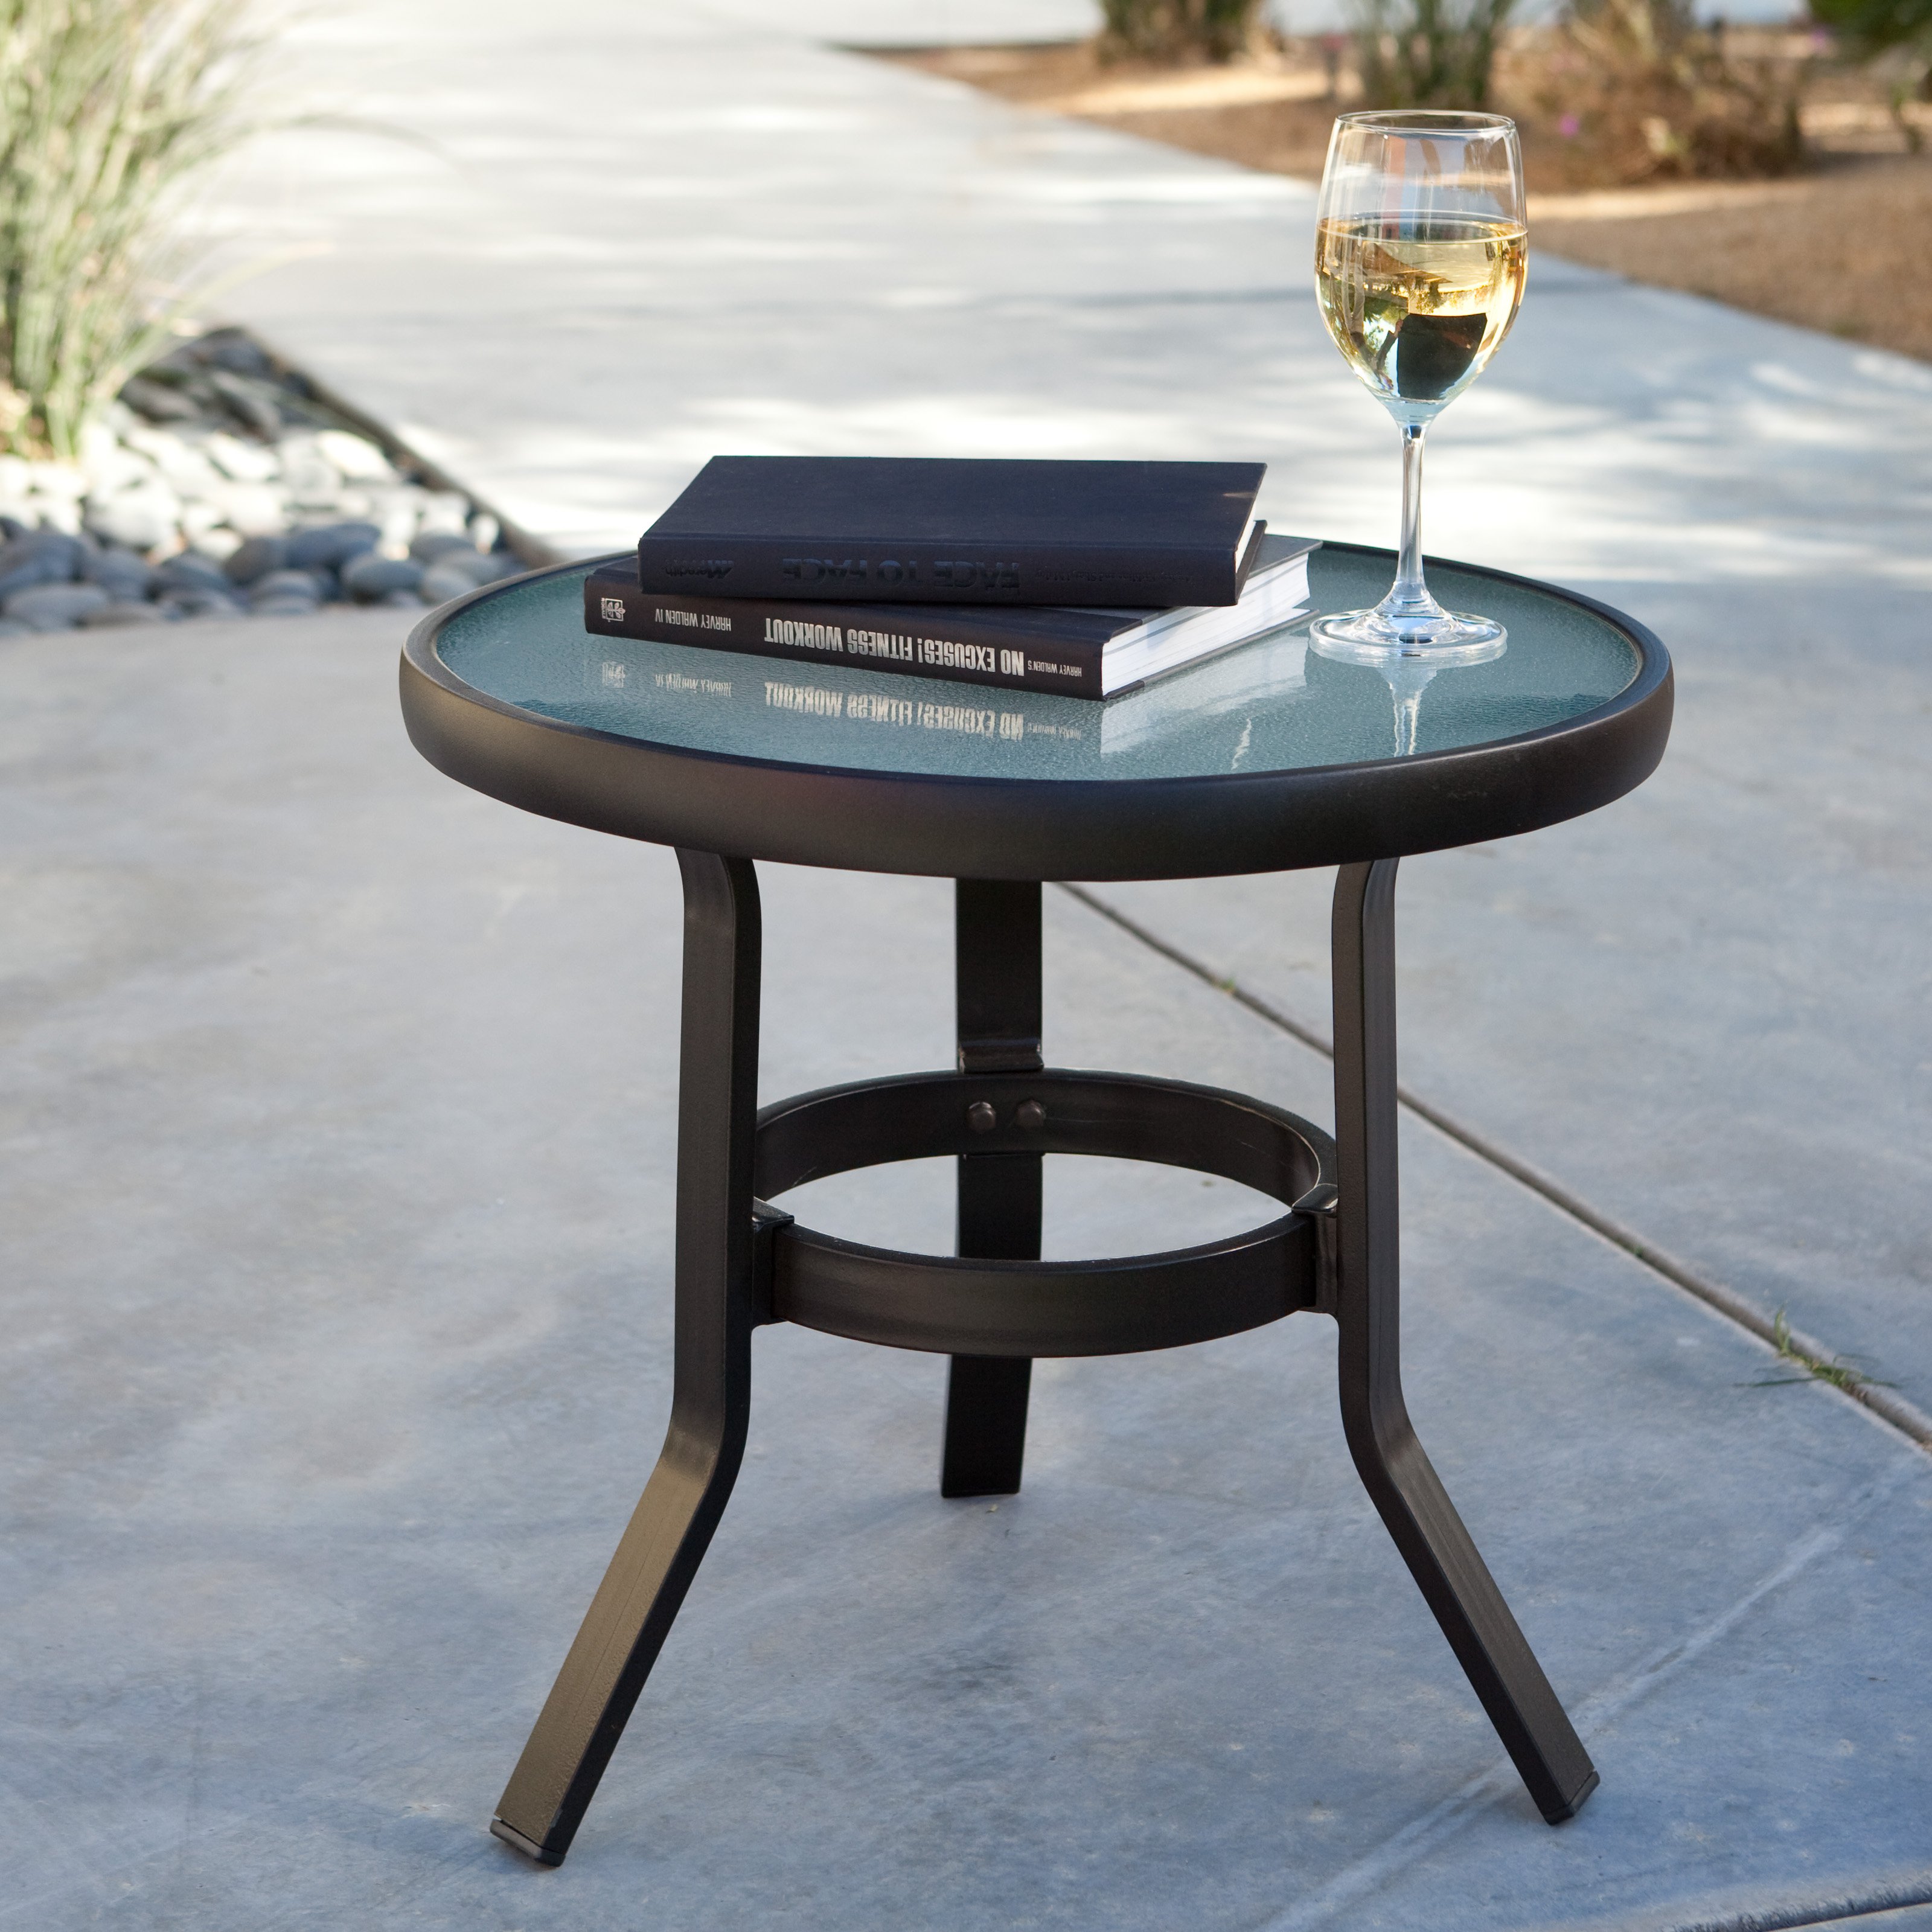 coral coast patio side table accent tables unfinished small outdoor target pier one papasan chair large garden umbrellas laminate floor beading kitchen counter butler end round